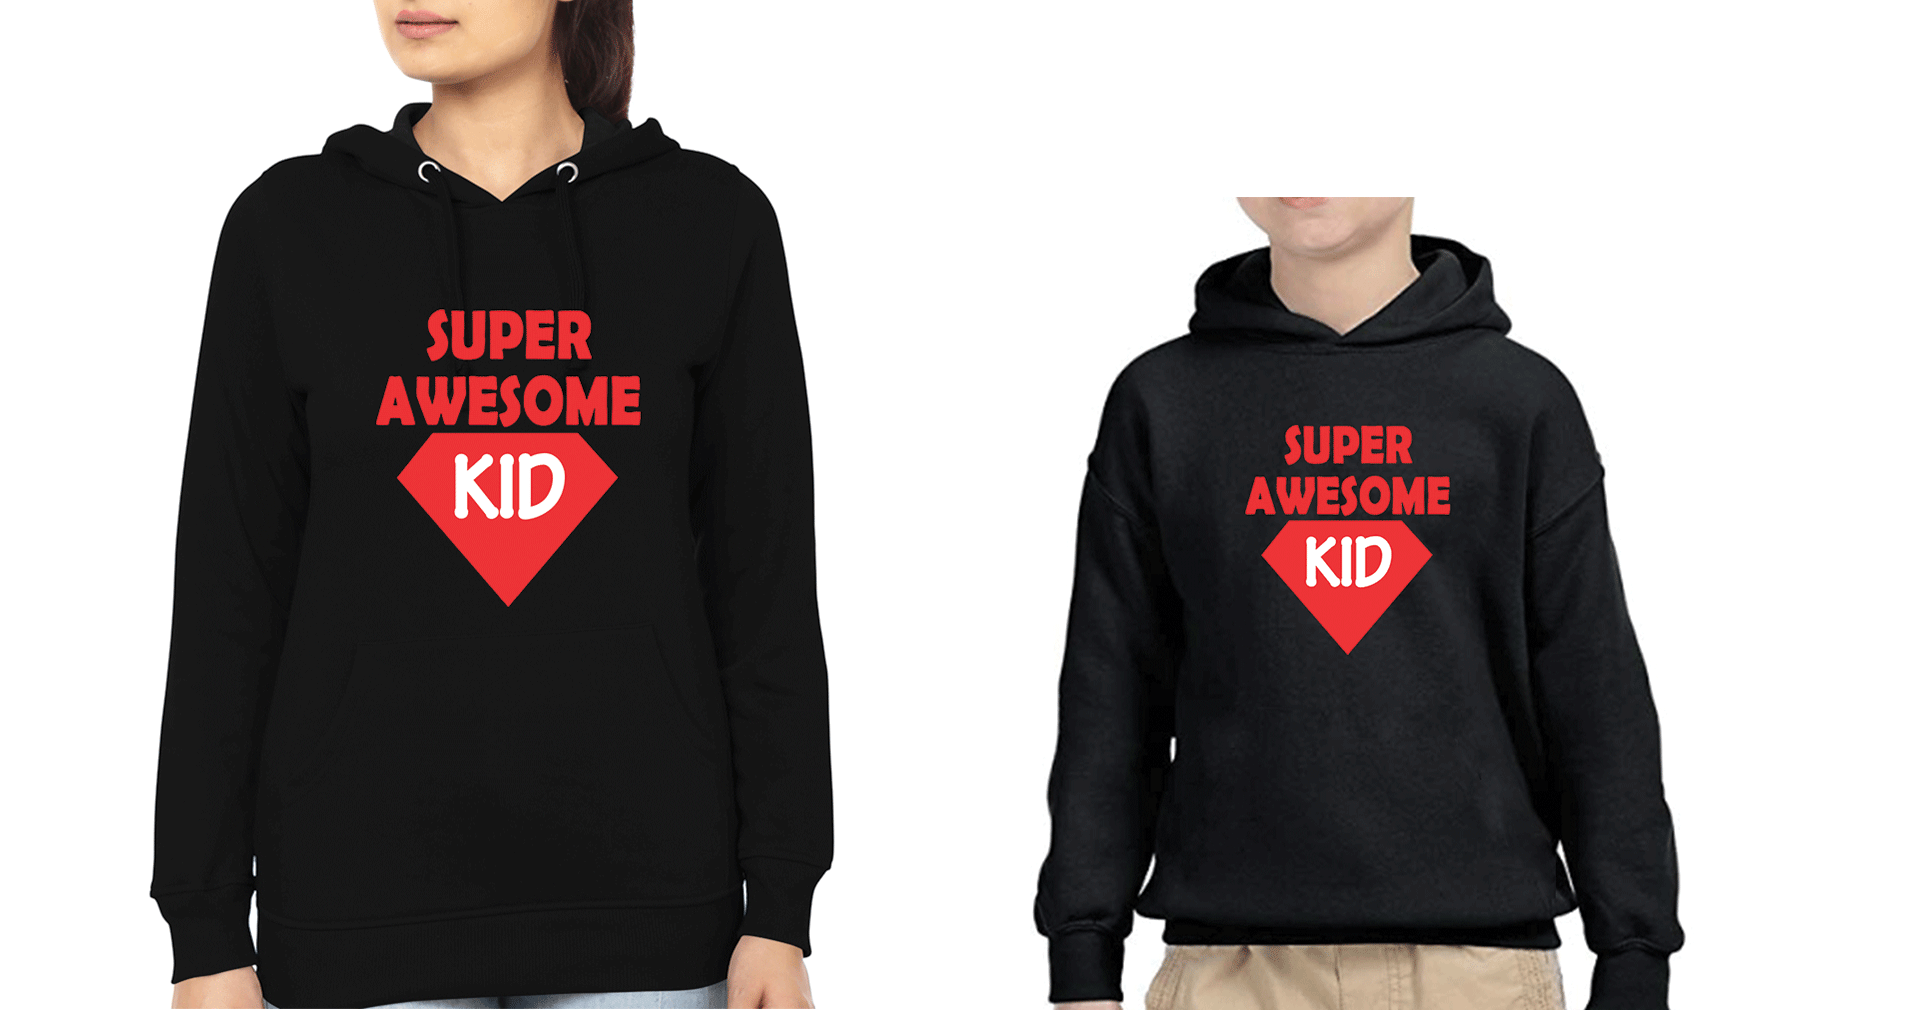 Super Awesome Kid Super Awesome Mom Mother and Son Matching Hoodies- FunkyTradition